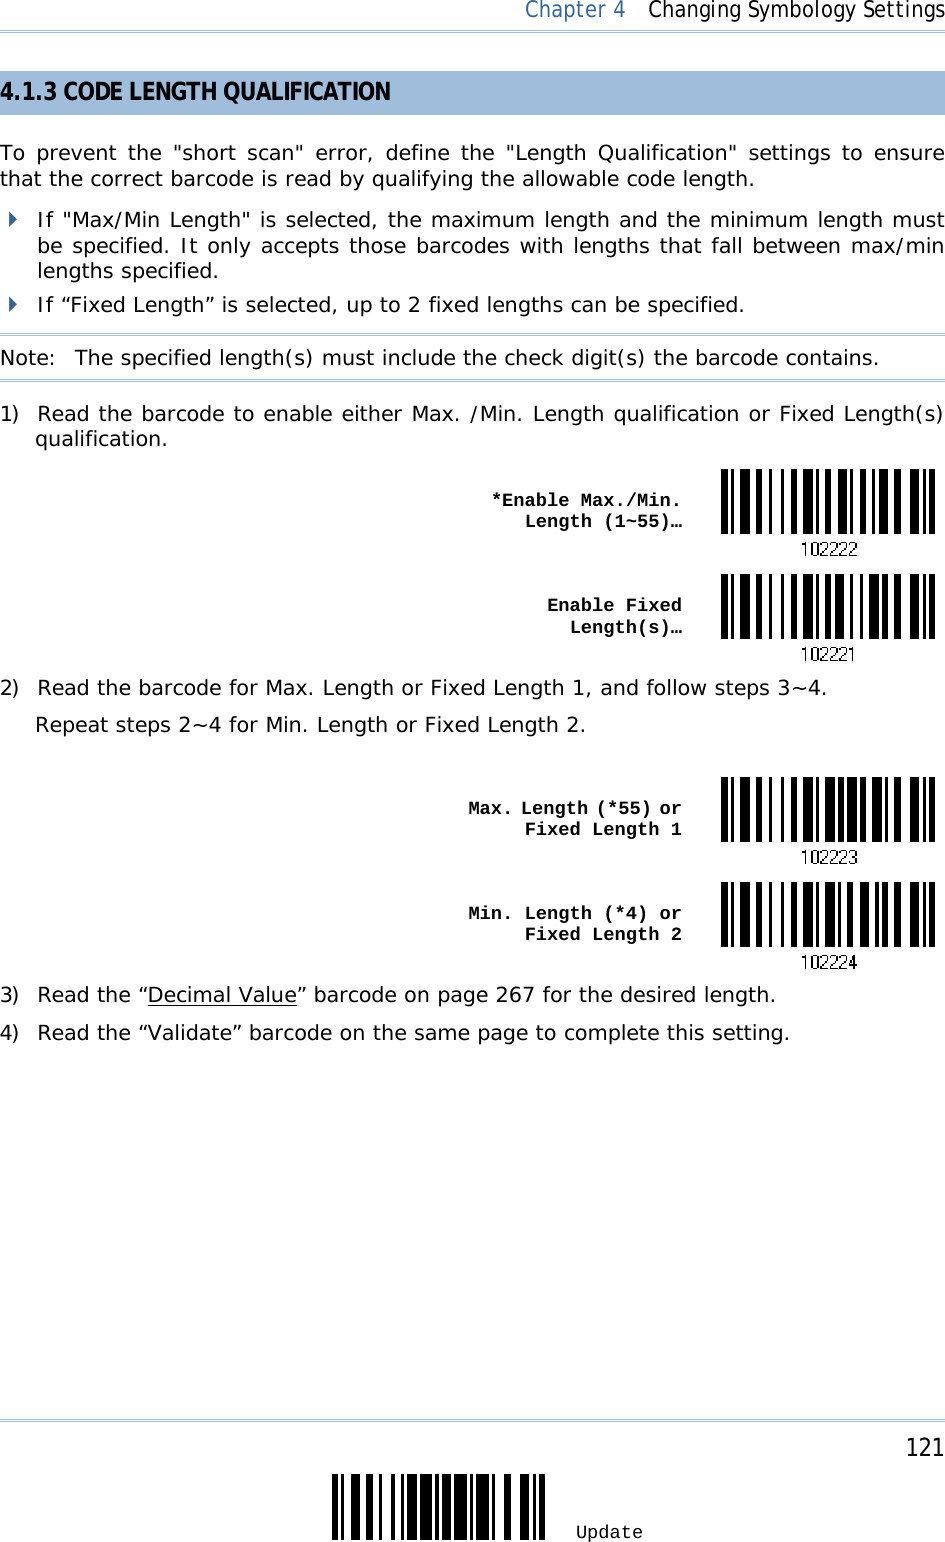     121 Update  Chapter 4  Changing Symbology Settings 4.1.3 CODE LENGTH QUALIFICATION To prevent the &quot;short scan&quot; error, define the &quot;Length Qualification&quot; settings to ensure that the correct barcode is read by qualifying the allowable code length.  If &quot;Max/Min Length&quot; is selected, the maximum length and the minimum length must be specified. It only accepts those barcodes with lengths that fall between max/min lengths specified.  If “Fixed Length” is selected, up to 2 fixed lengths can be specified. Note:   The specified length(s) must include the check digit(s) the barcode contains. 1) Read the barcode to enable either Max. /Min. Length qualification or Fixed Length(s) qualification.  *Enable Max./Min. Length (1~55)… Enable Fixed Length(s)…2) Read the barcode for Max. Length or Fixed Length 1, and follow steps 3~4. Repeat steps 2~4 for Min. Length or Fixed Length 2.   Max. Length (*55) or Fixed Length 1 Min. Length (*4) or Fixed Length 23) Read the “Decimal Value” barcode on page 267 for the desired length.  4) Read the “Validate” barcode on the same page to complete this setting. 